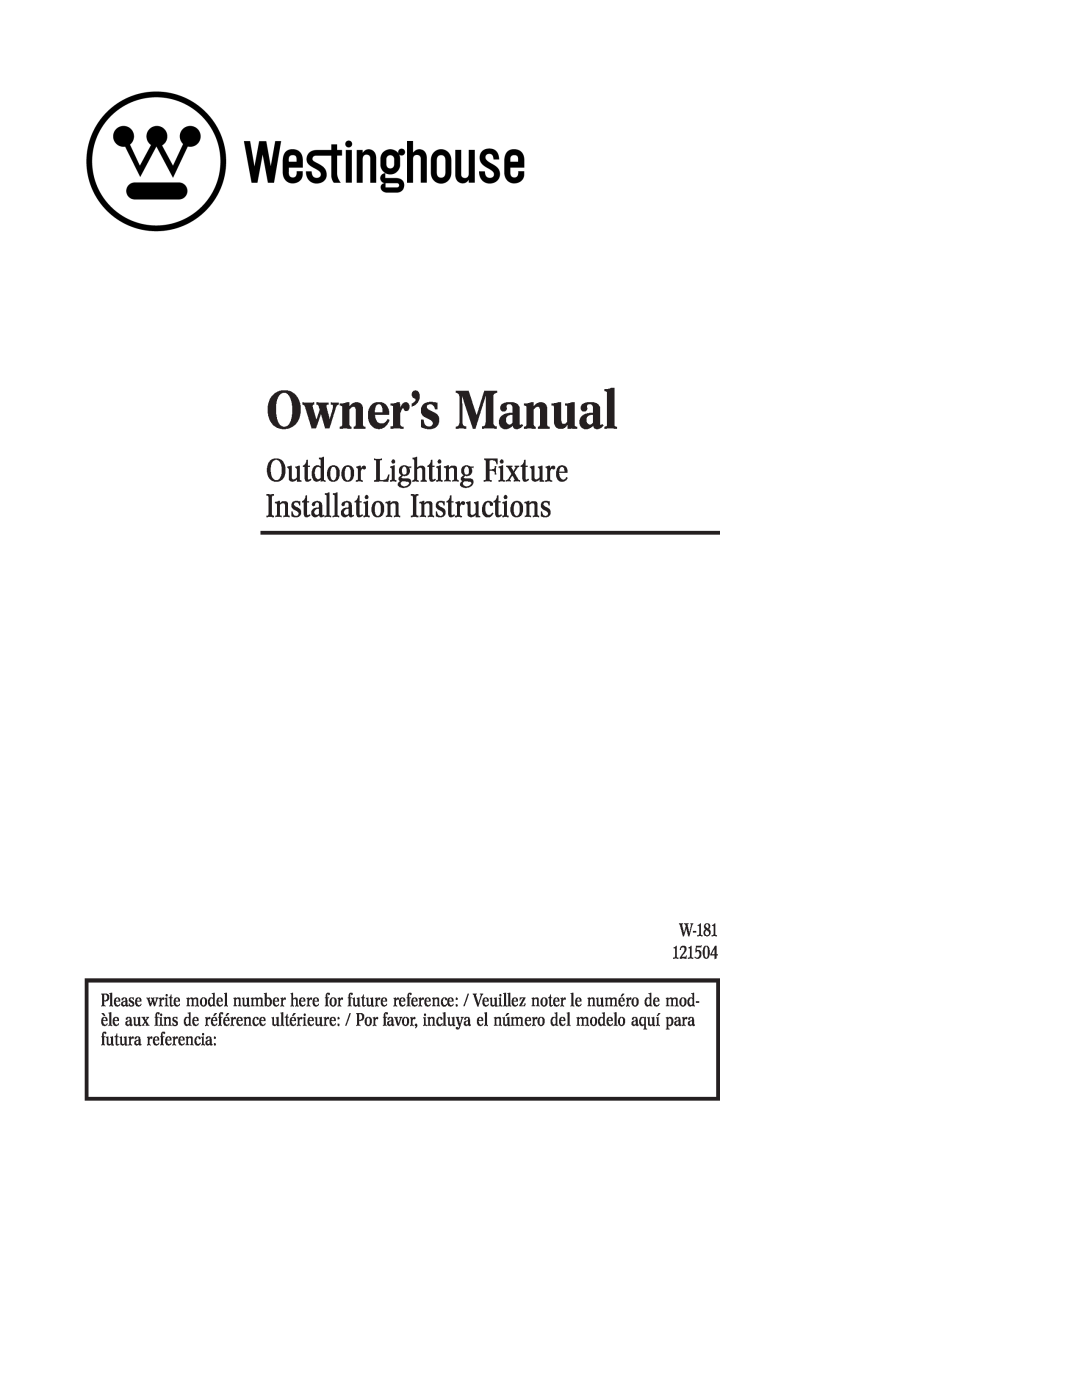 Westinghouse W-181 owner manual Outdoor Lighting Fixture, Installation Instructions 